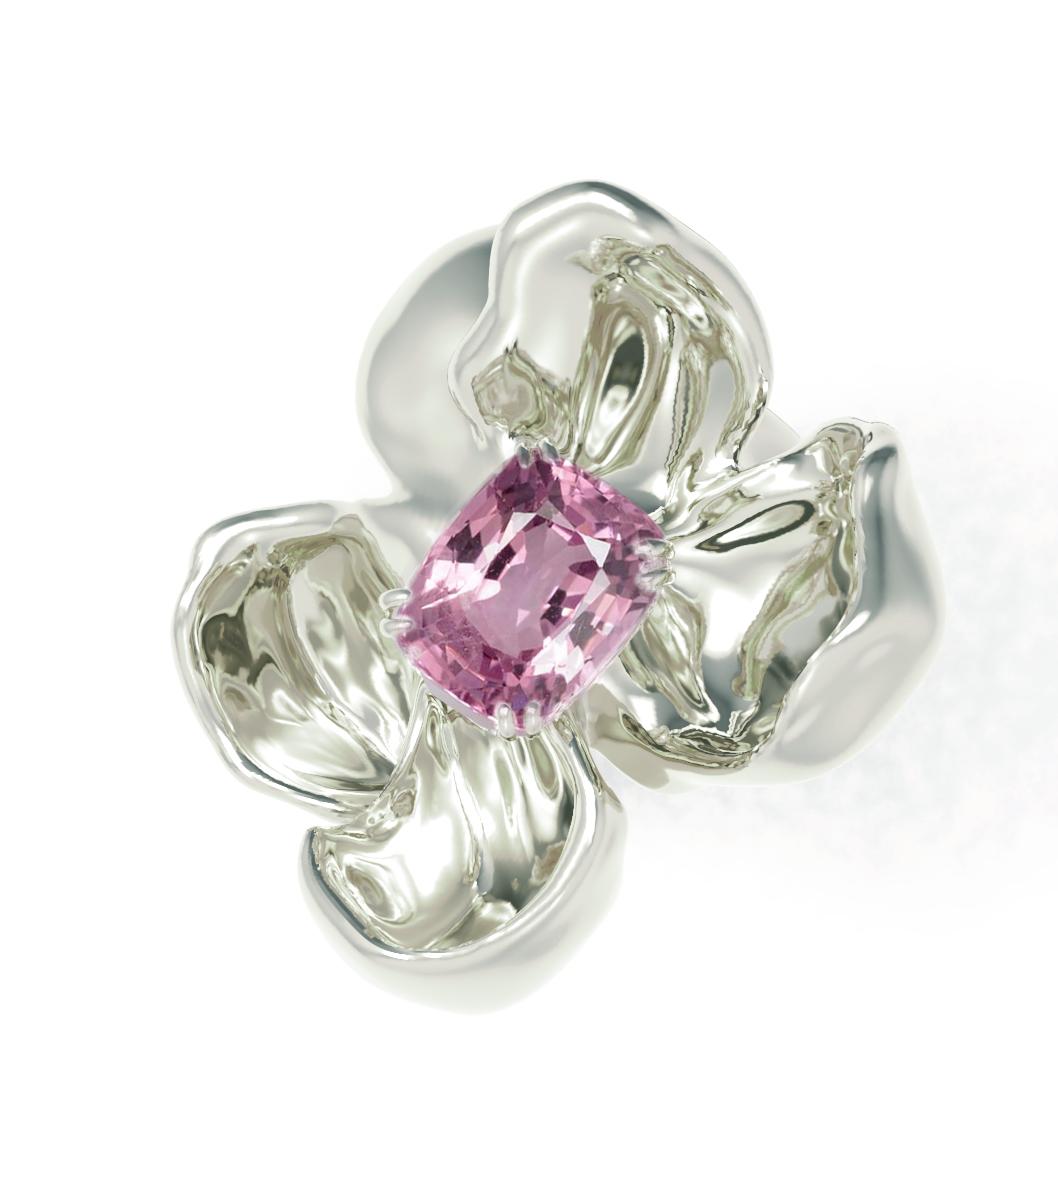 18 Karat White Gold Contemporary Cocktail Ring with Berry Spinel by Artist In New Condition For Sale In Berlin, DE